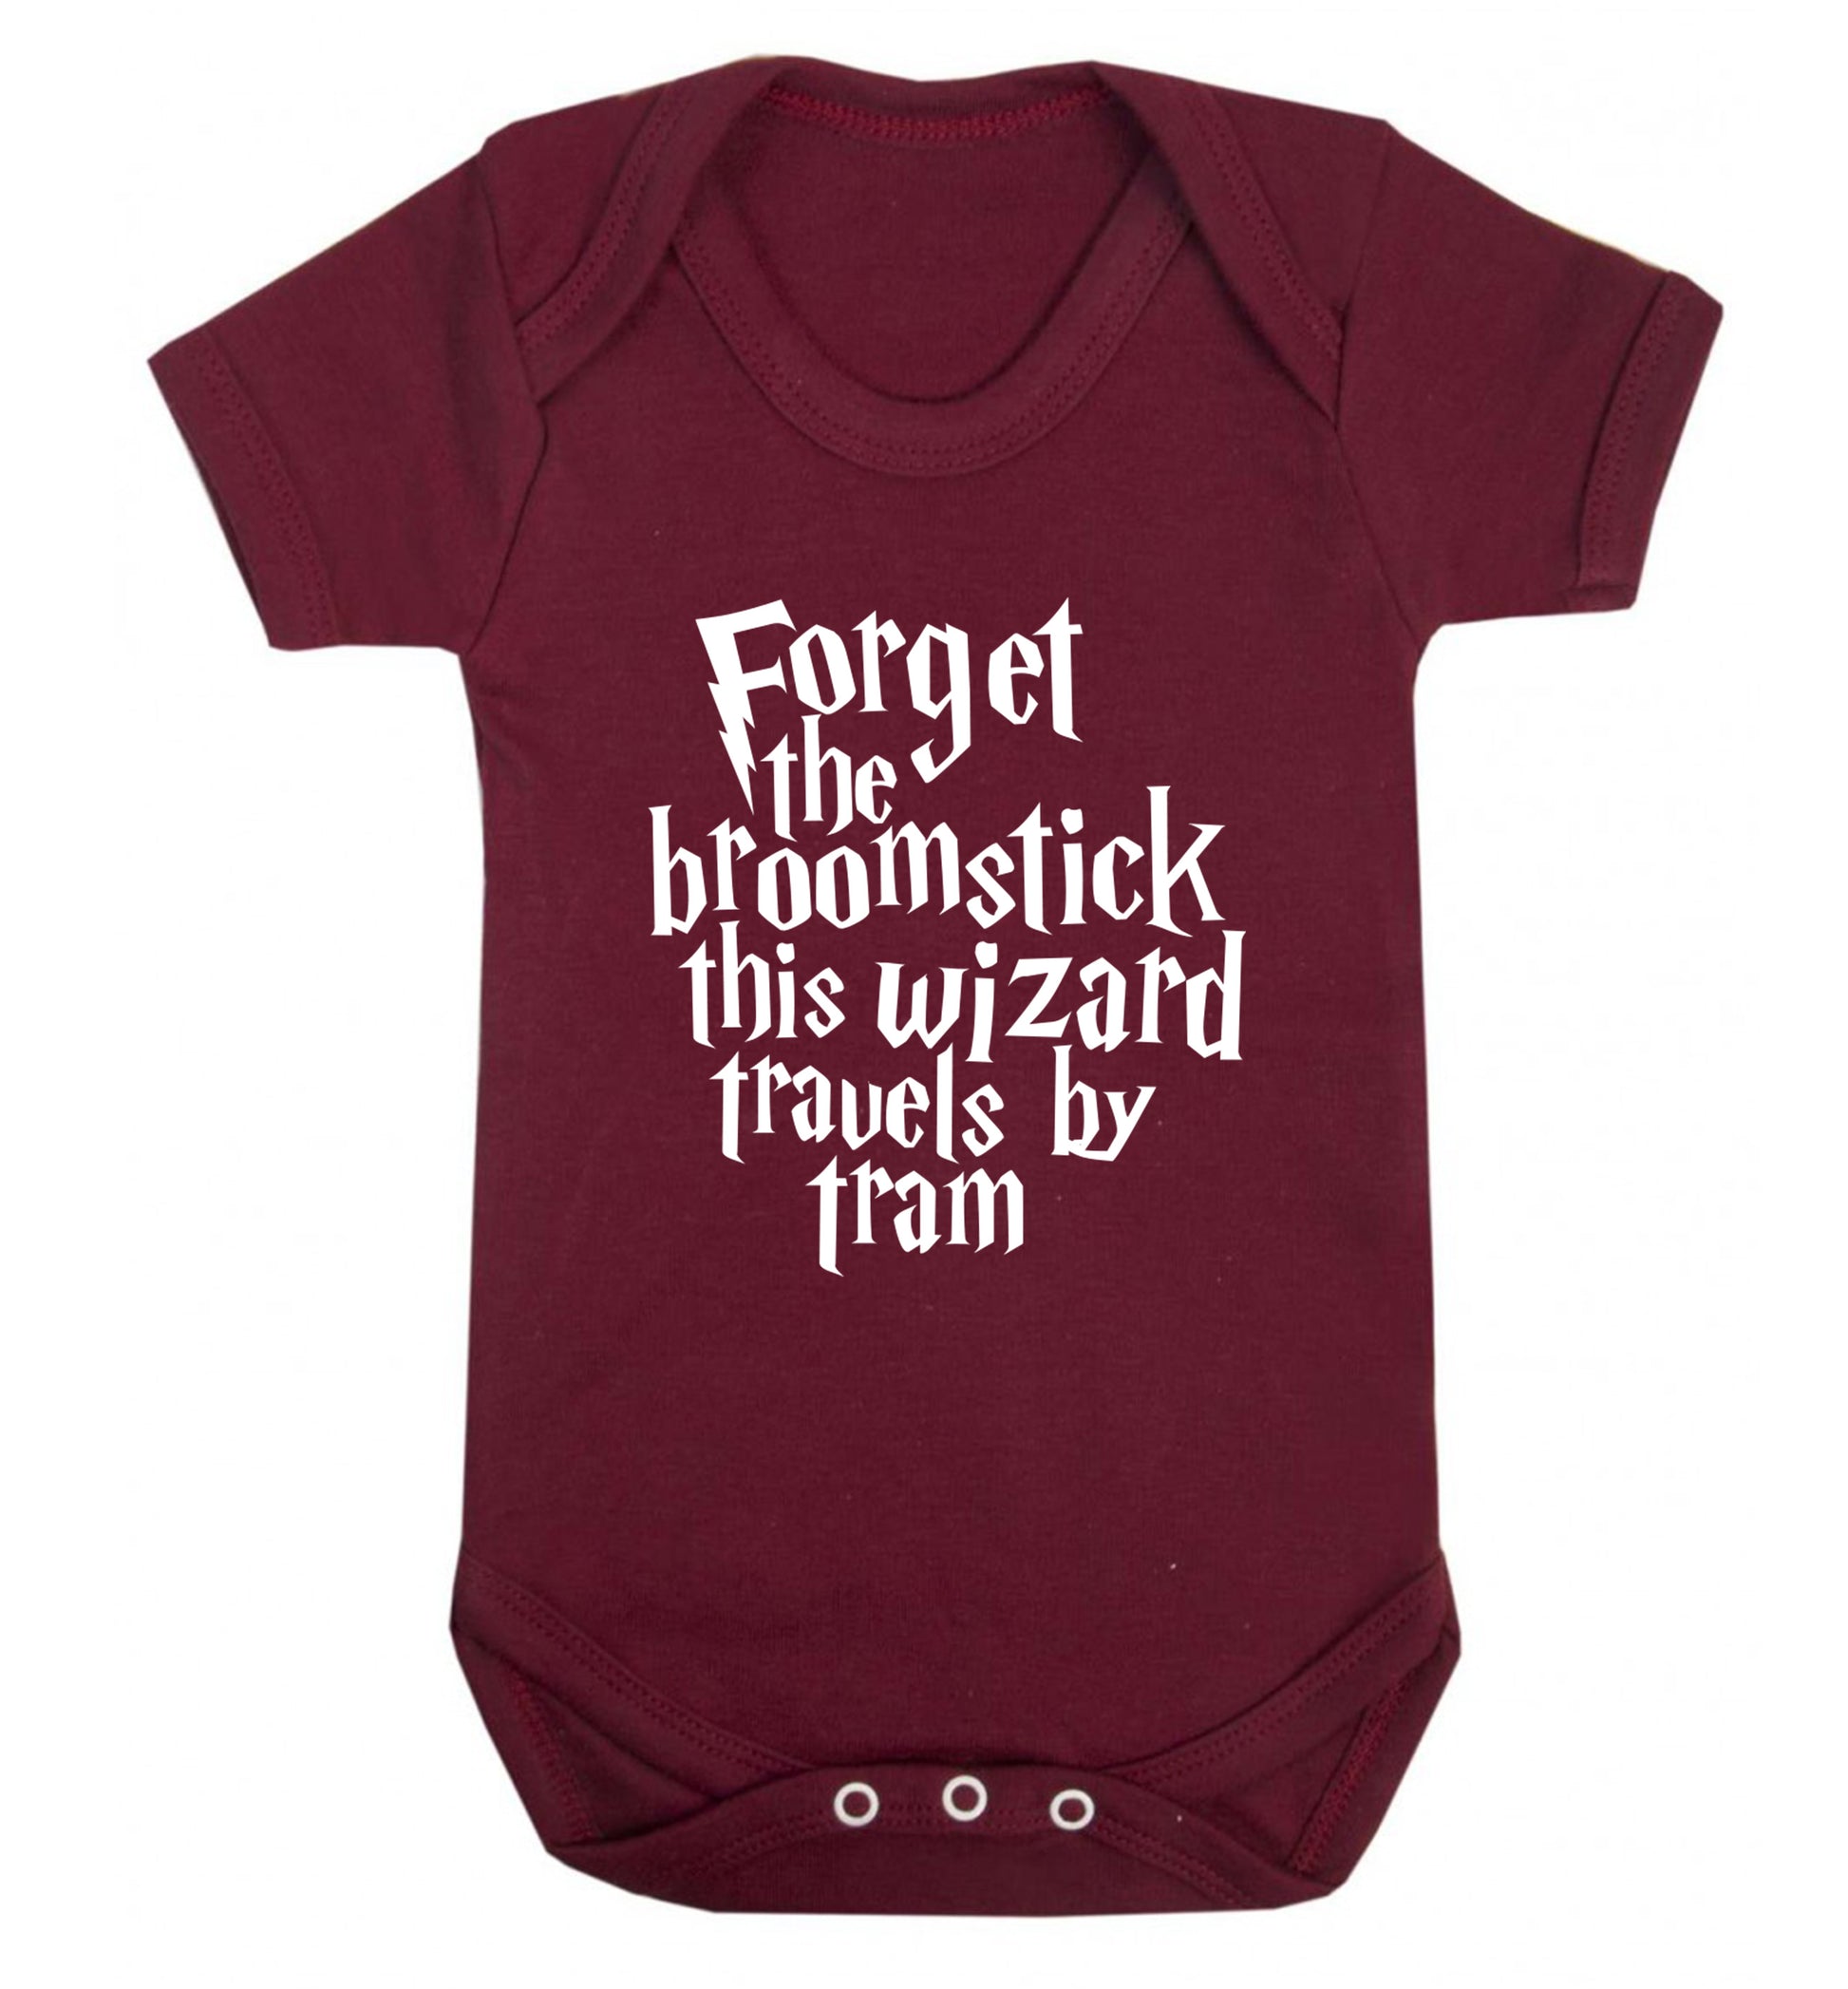 Forget the broomstick this wizard travels by tram Baby Vest maroon 18-24 months